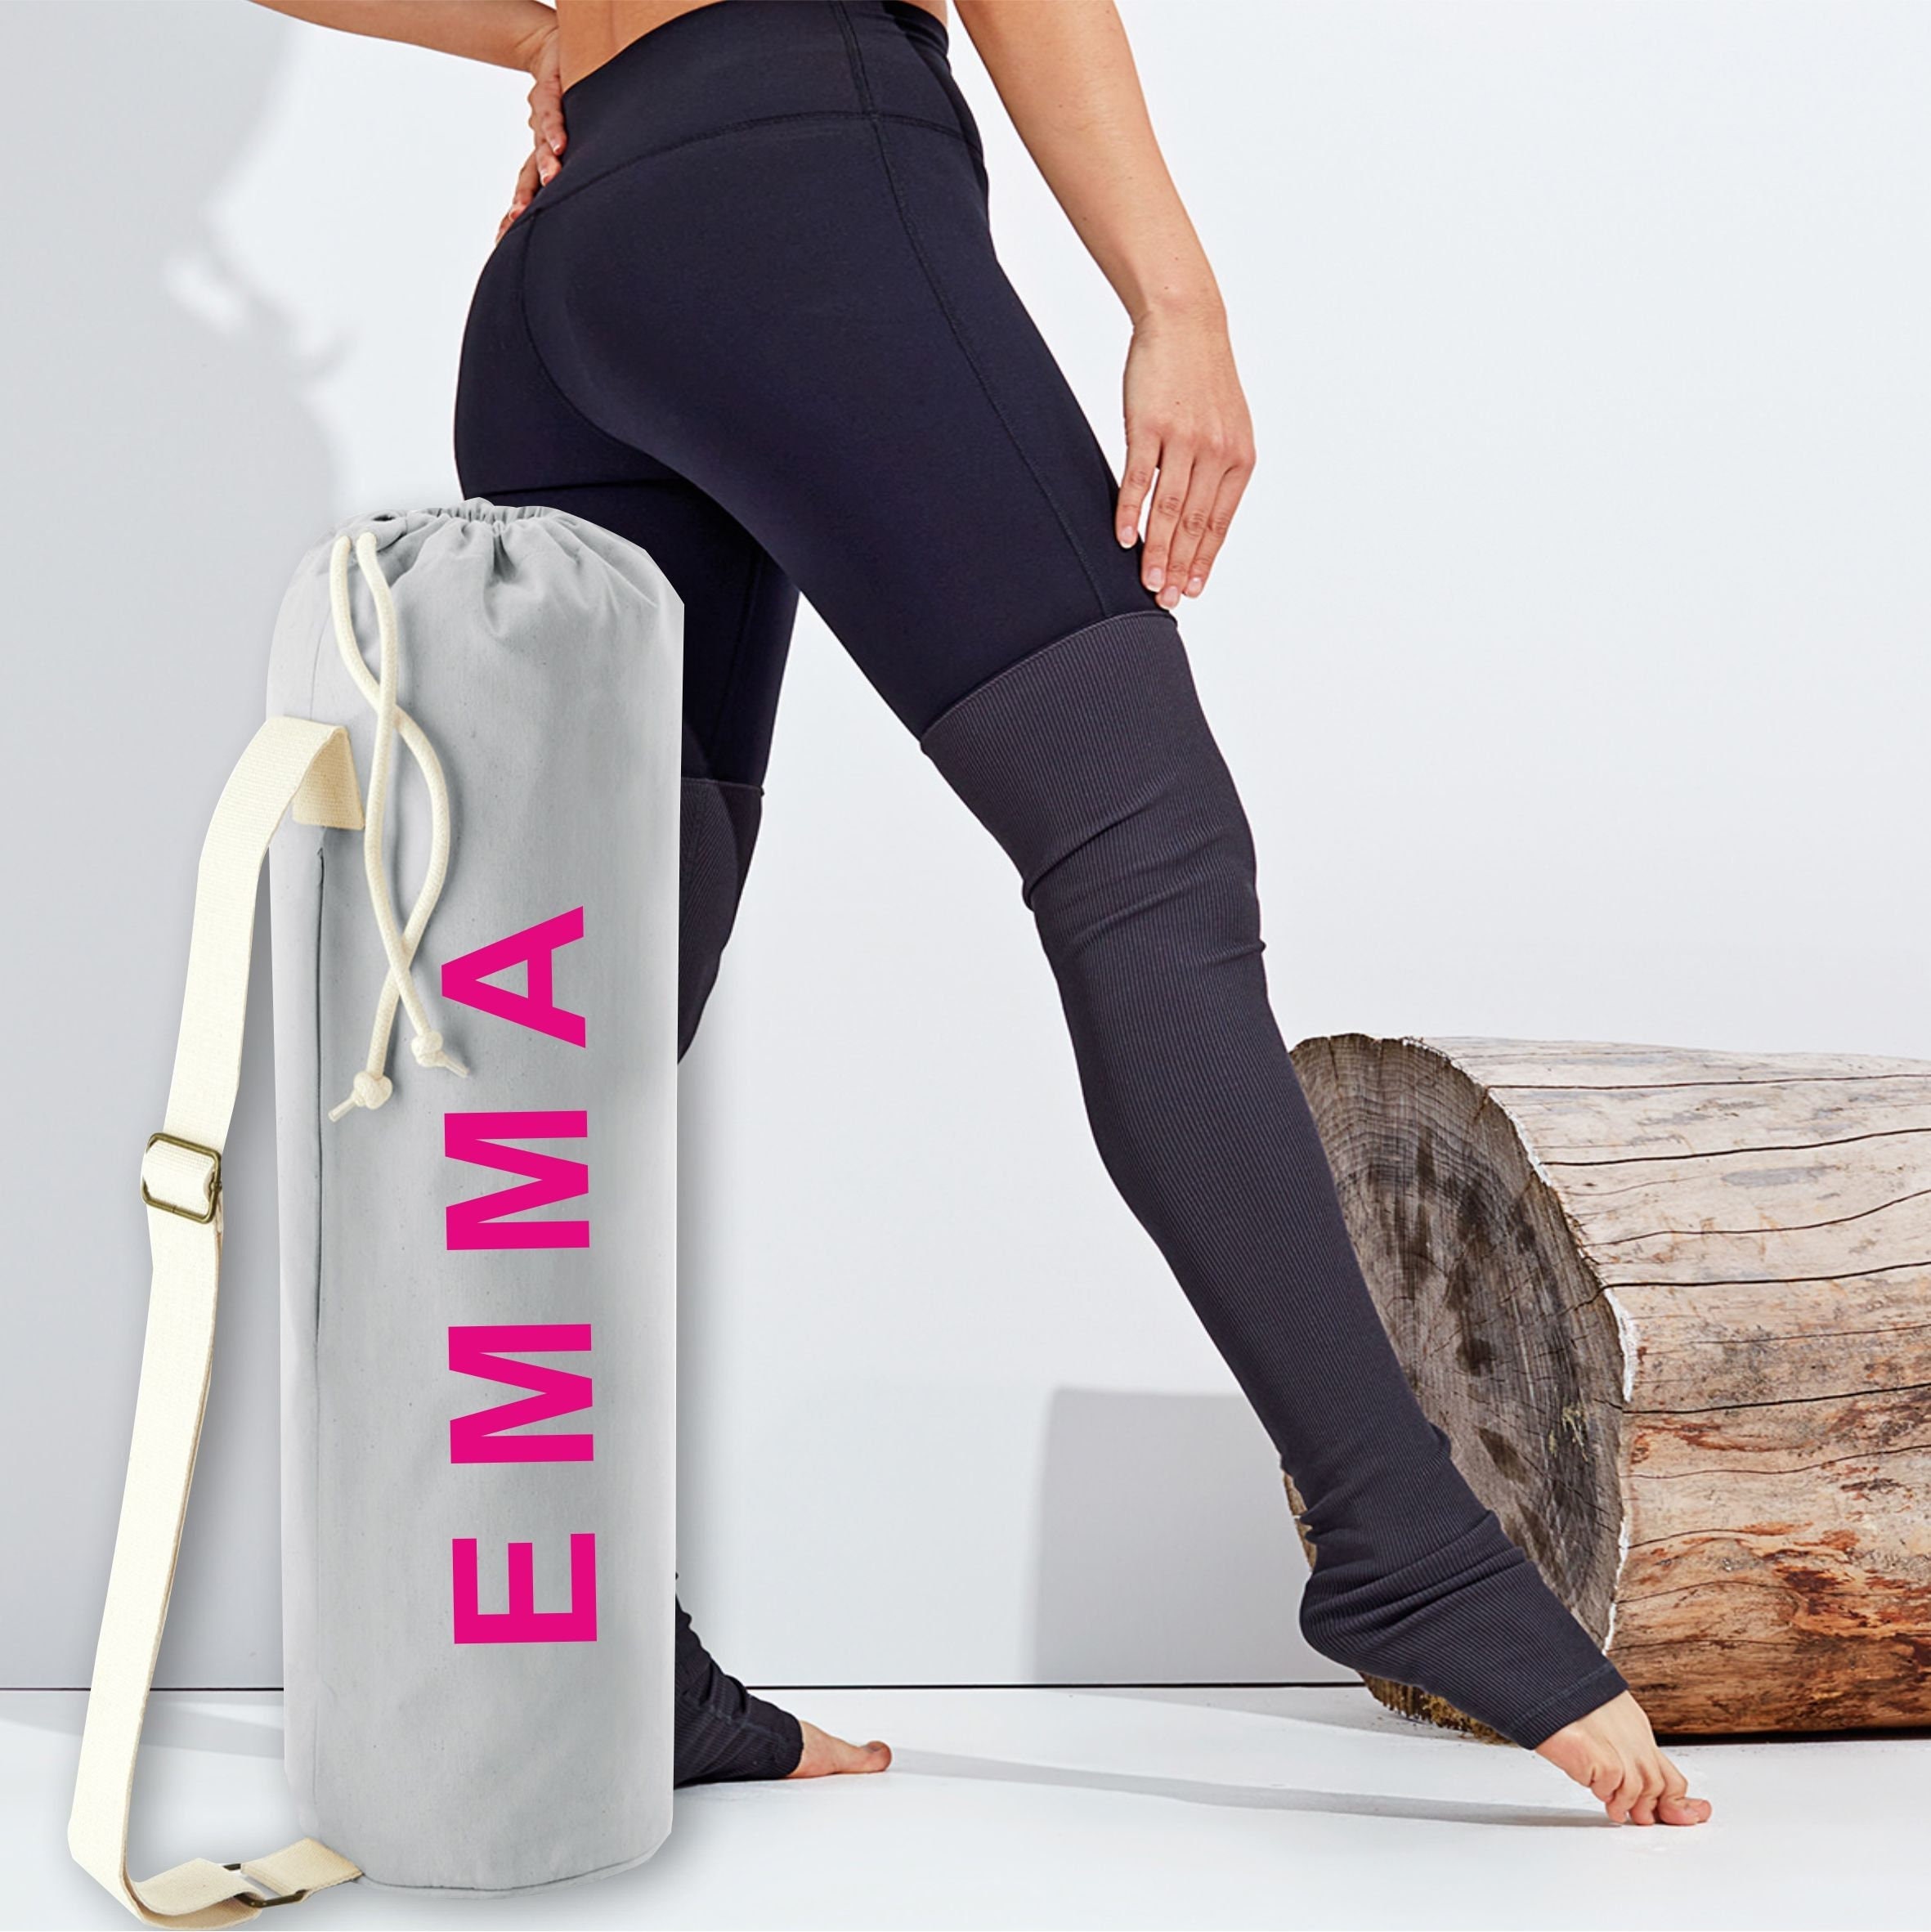 Yoga Mat Bag Printed With Name / Personalised Made From Premium,  Heavyweight, 100% Organic Certified Cotton Grey Plus Other Colours -   Sweden